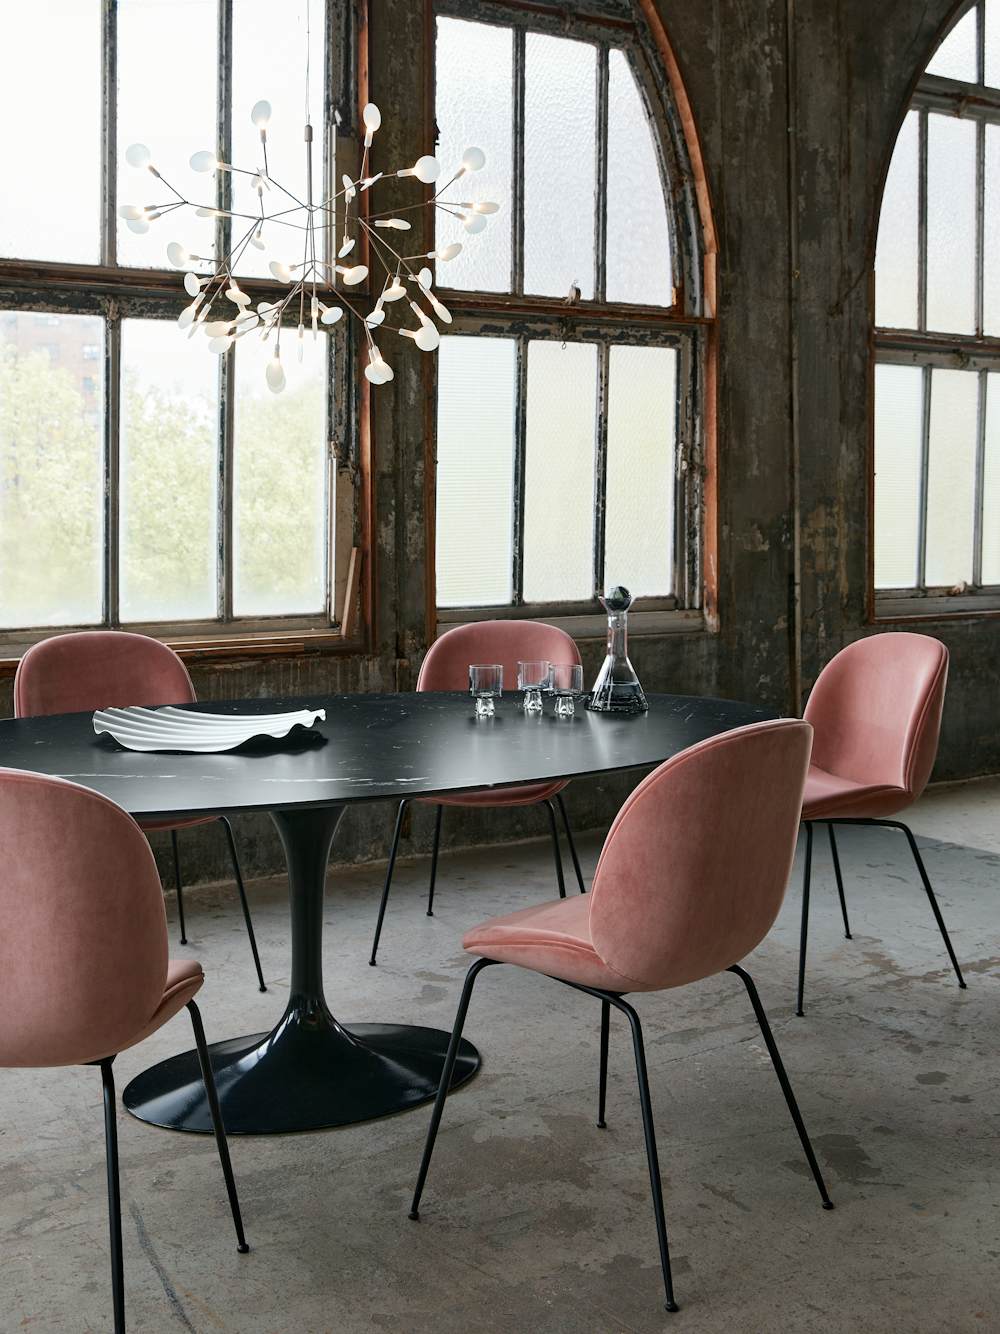 Heracleum II Pendant, Saarinen Dining Table and Beetle Chairs in a industrial loft dining room